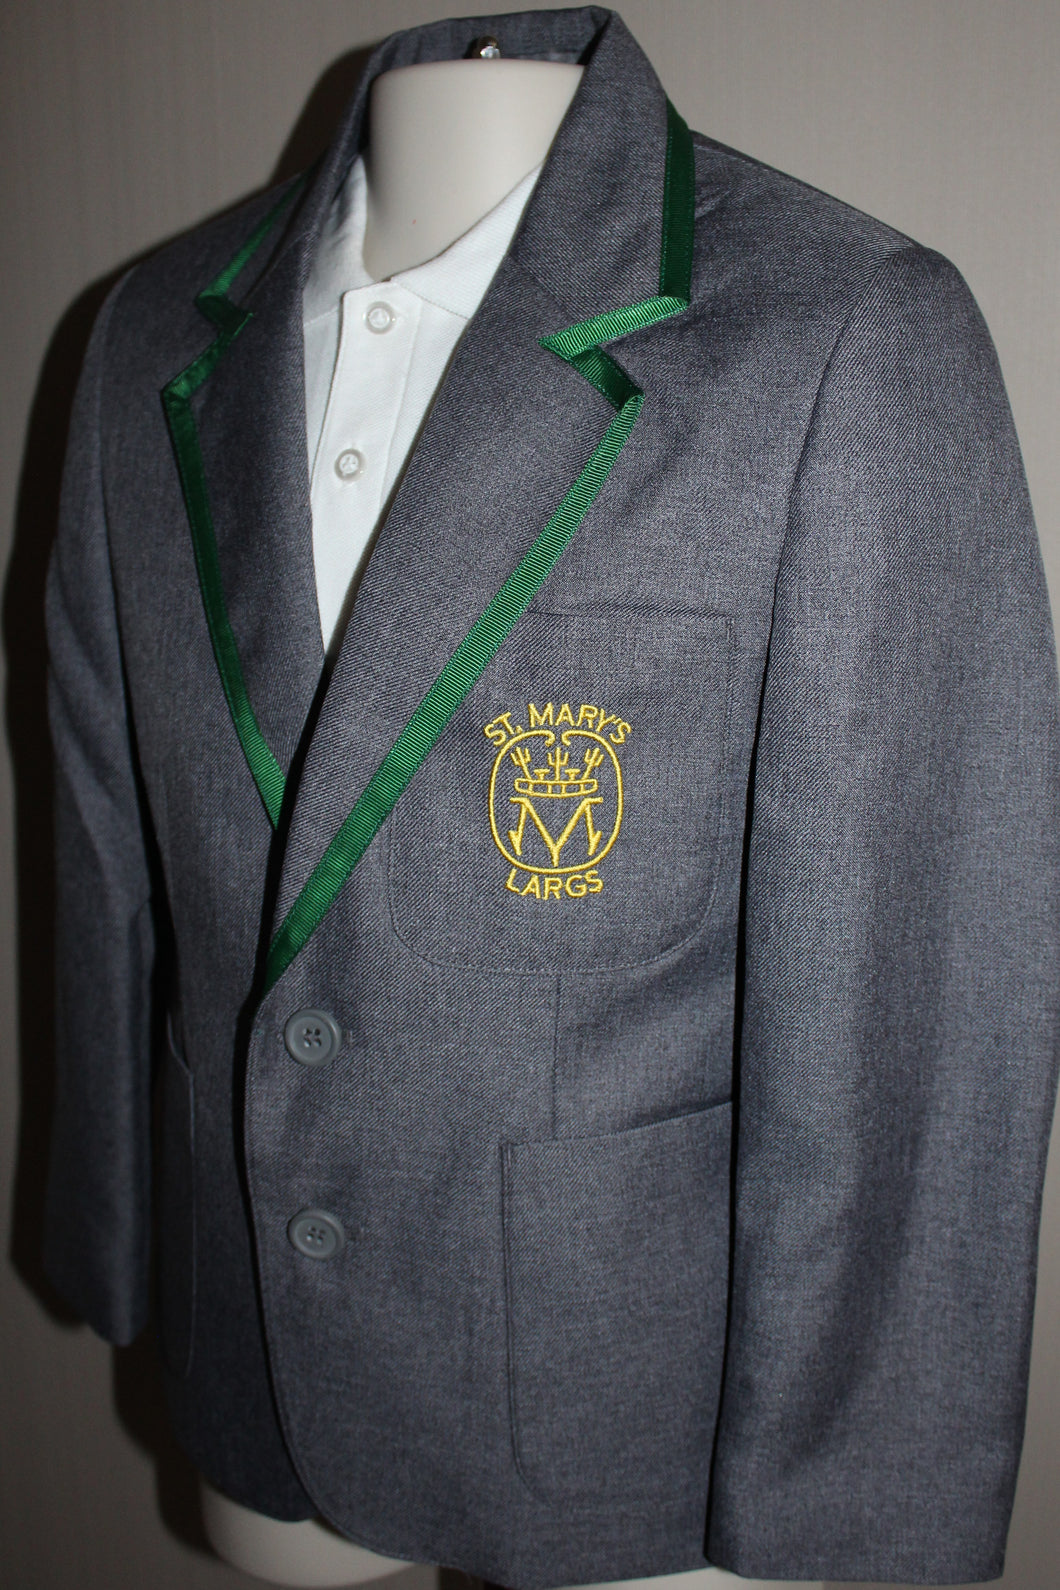 Eco Blazer made from recycled materials, super comfy to wear, embroidered with school badge for St Marys Largs